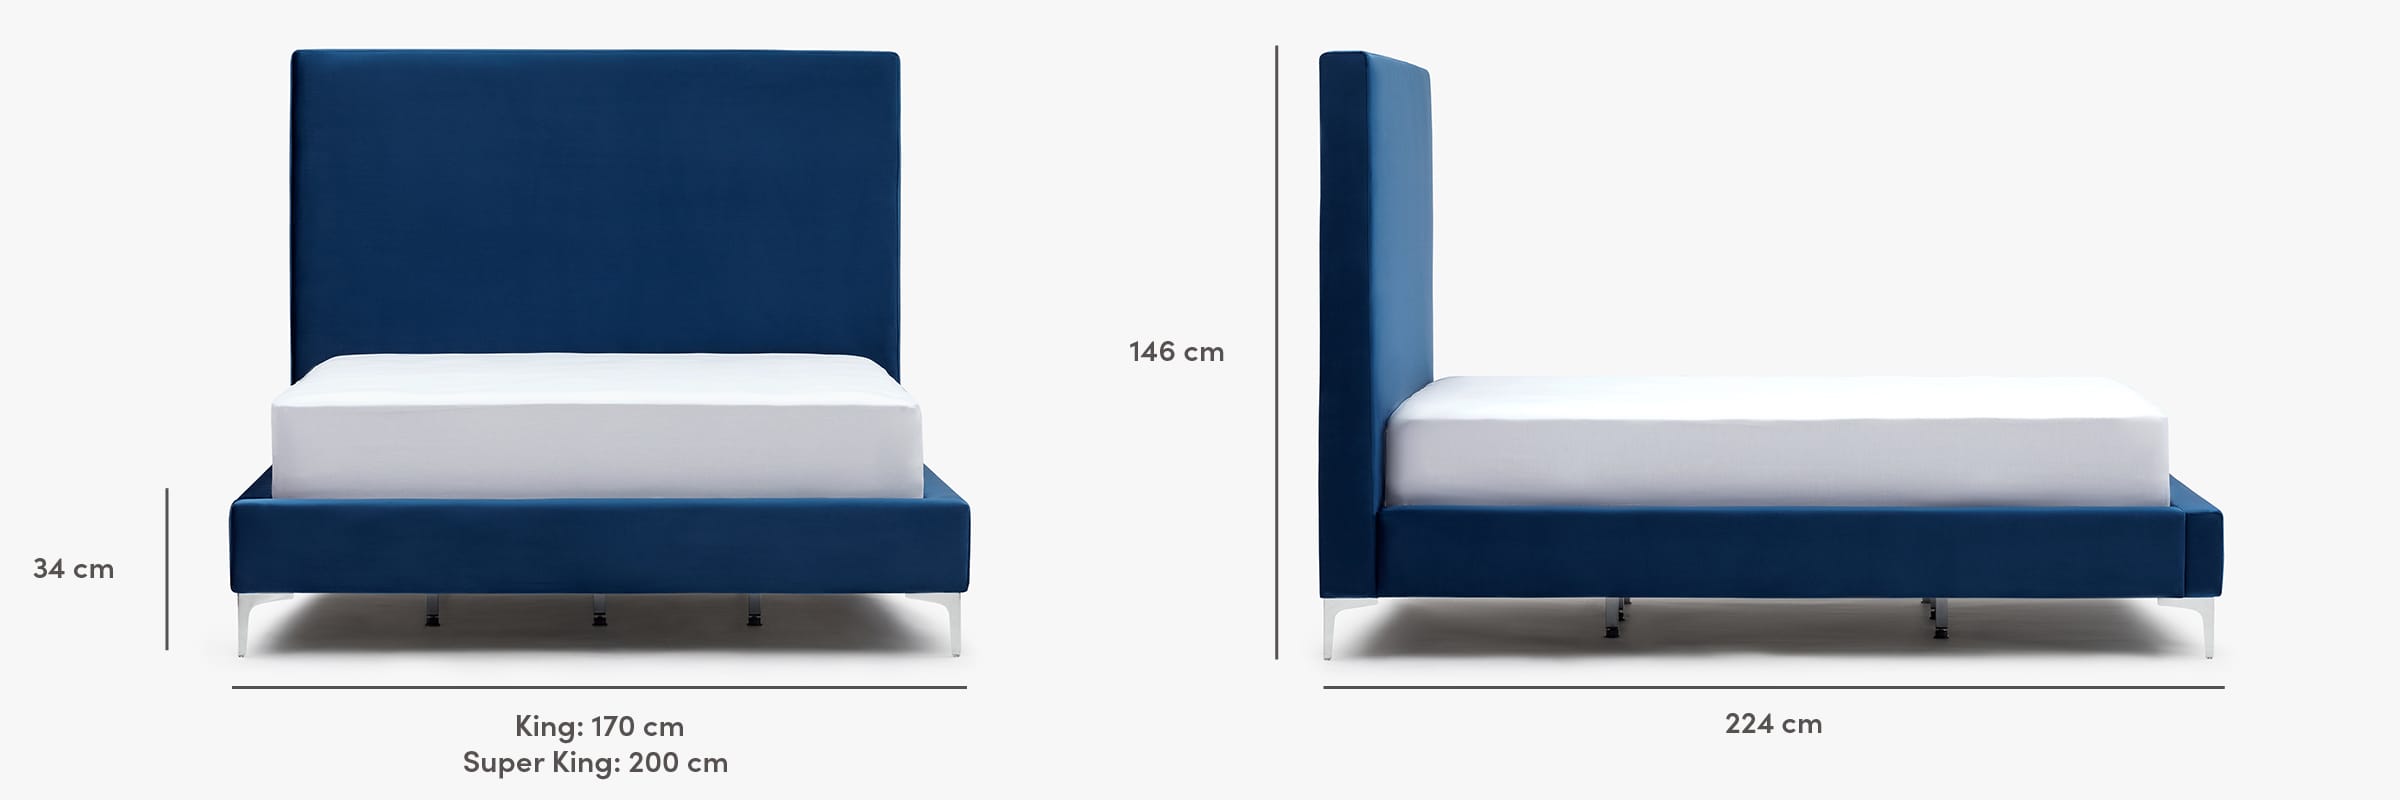 The Modena bed dimensions